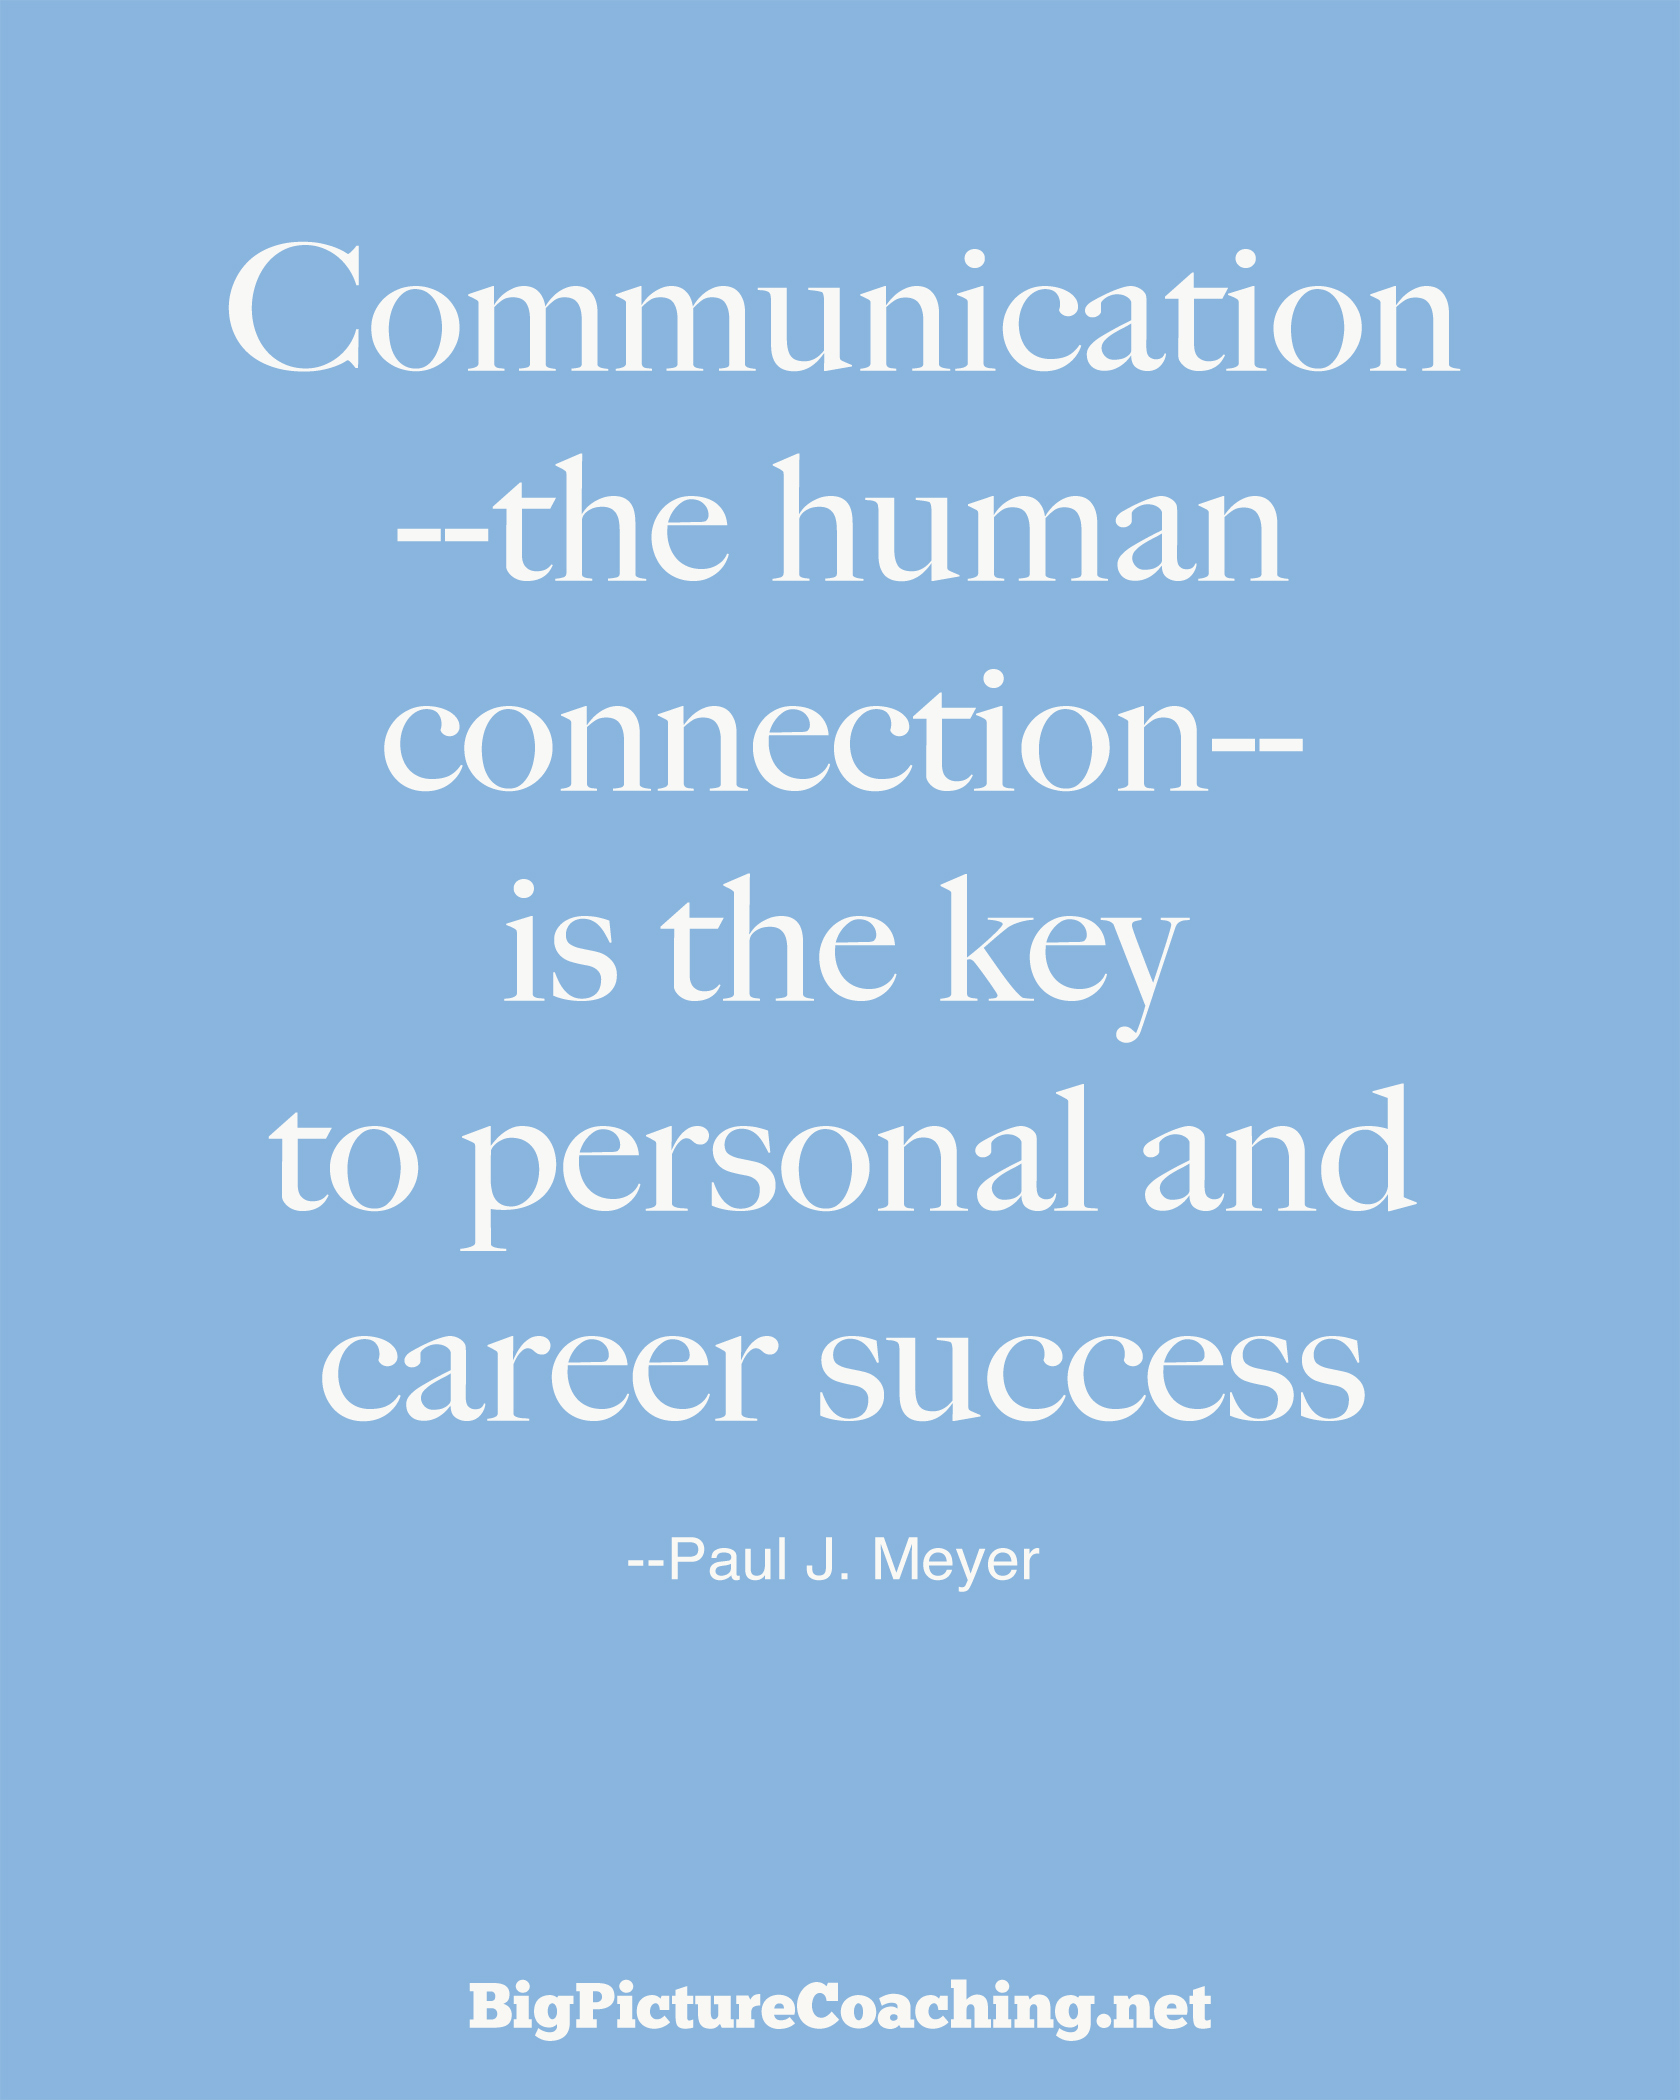  Workplace Communication Quotes in the world Check it out now 